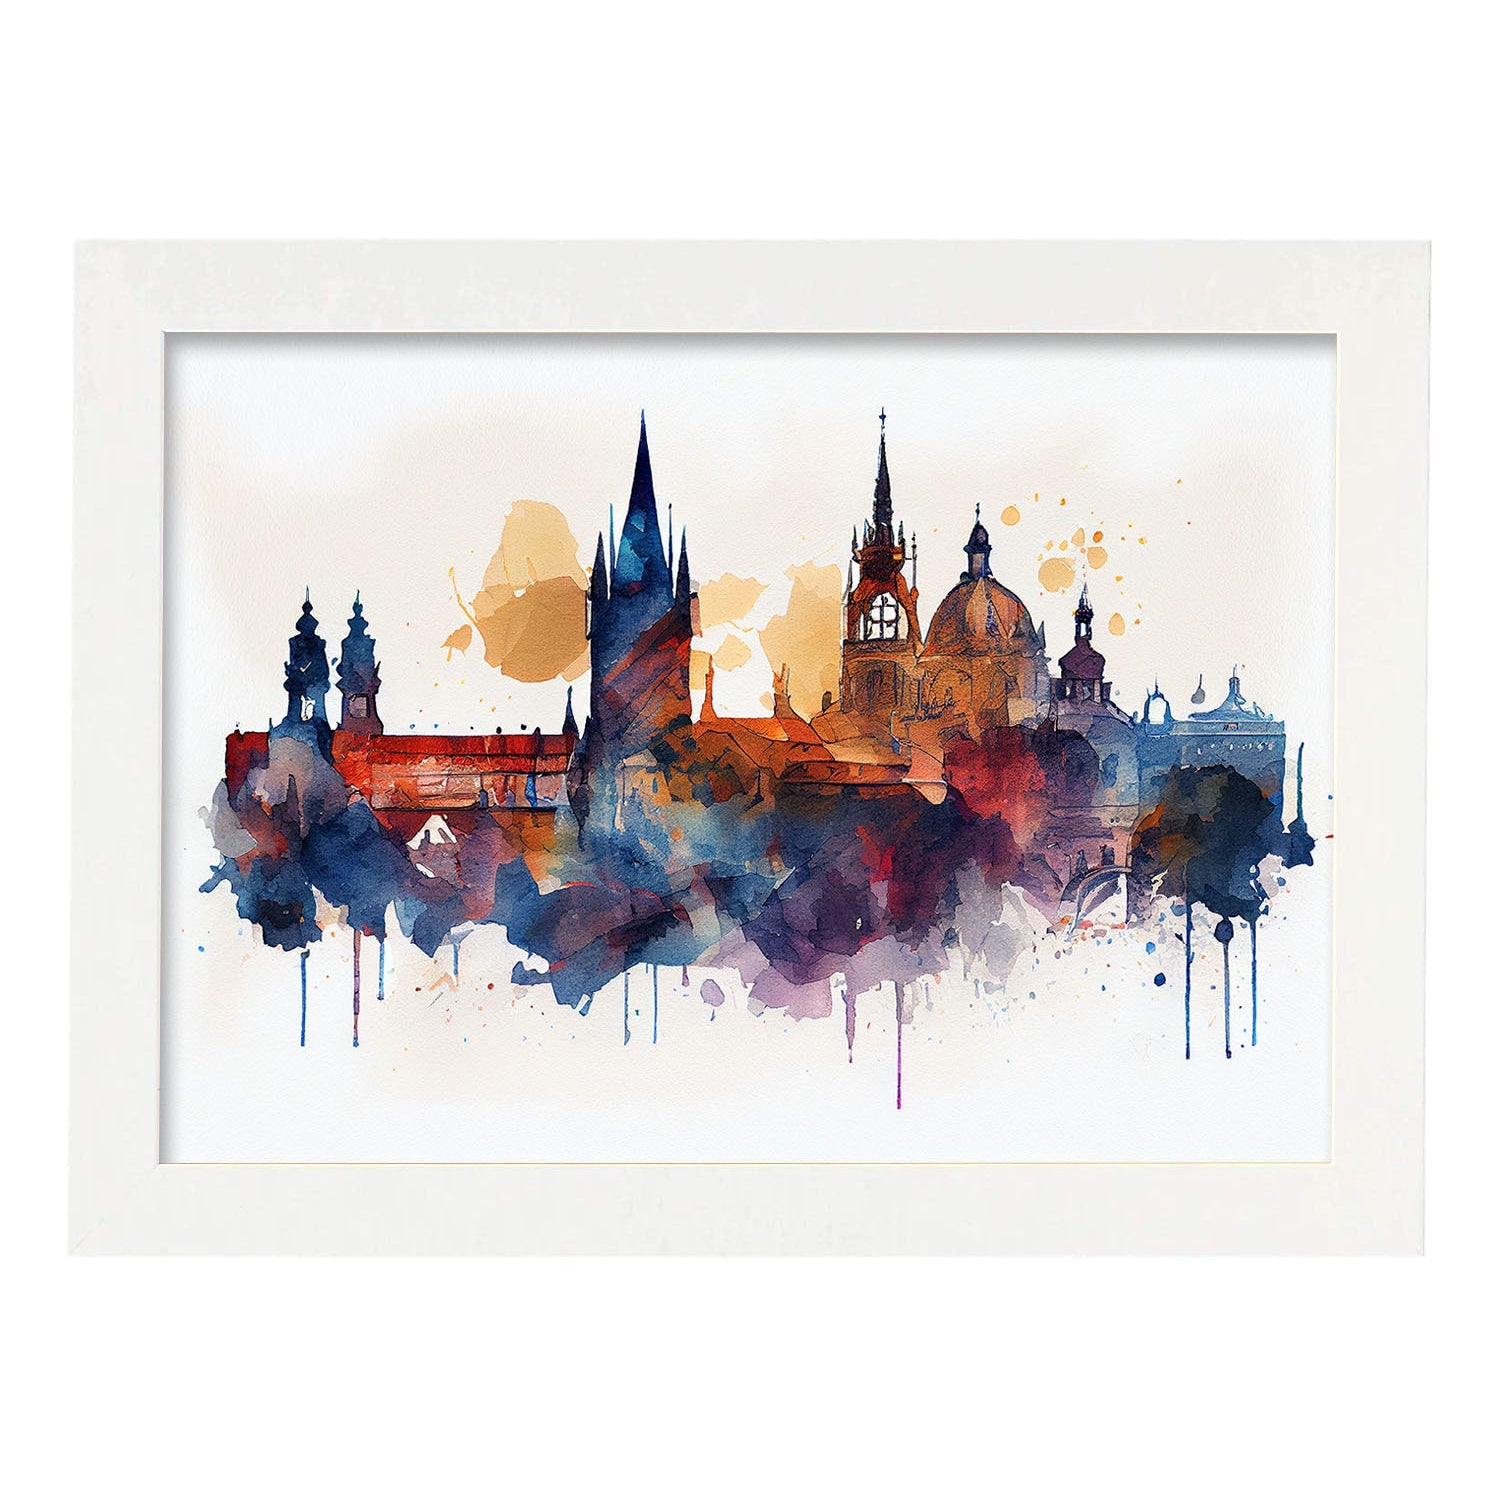 Nacnic watercolor of a skyline of the city of Prague_2. Aesthetic Wall Art Prints for Bedroom or Living Room Design.-Artwork-Nacnic-A4-Marco Blanco-Nacnic Estudio SL